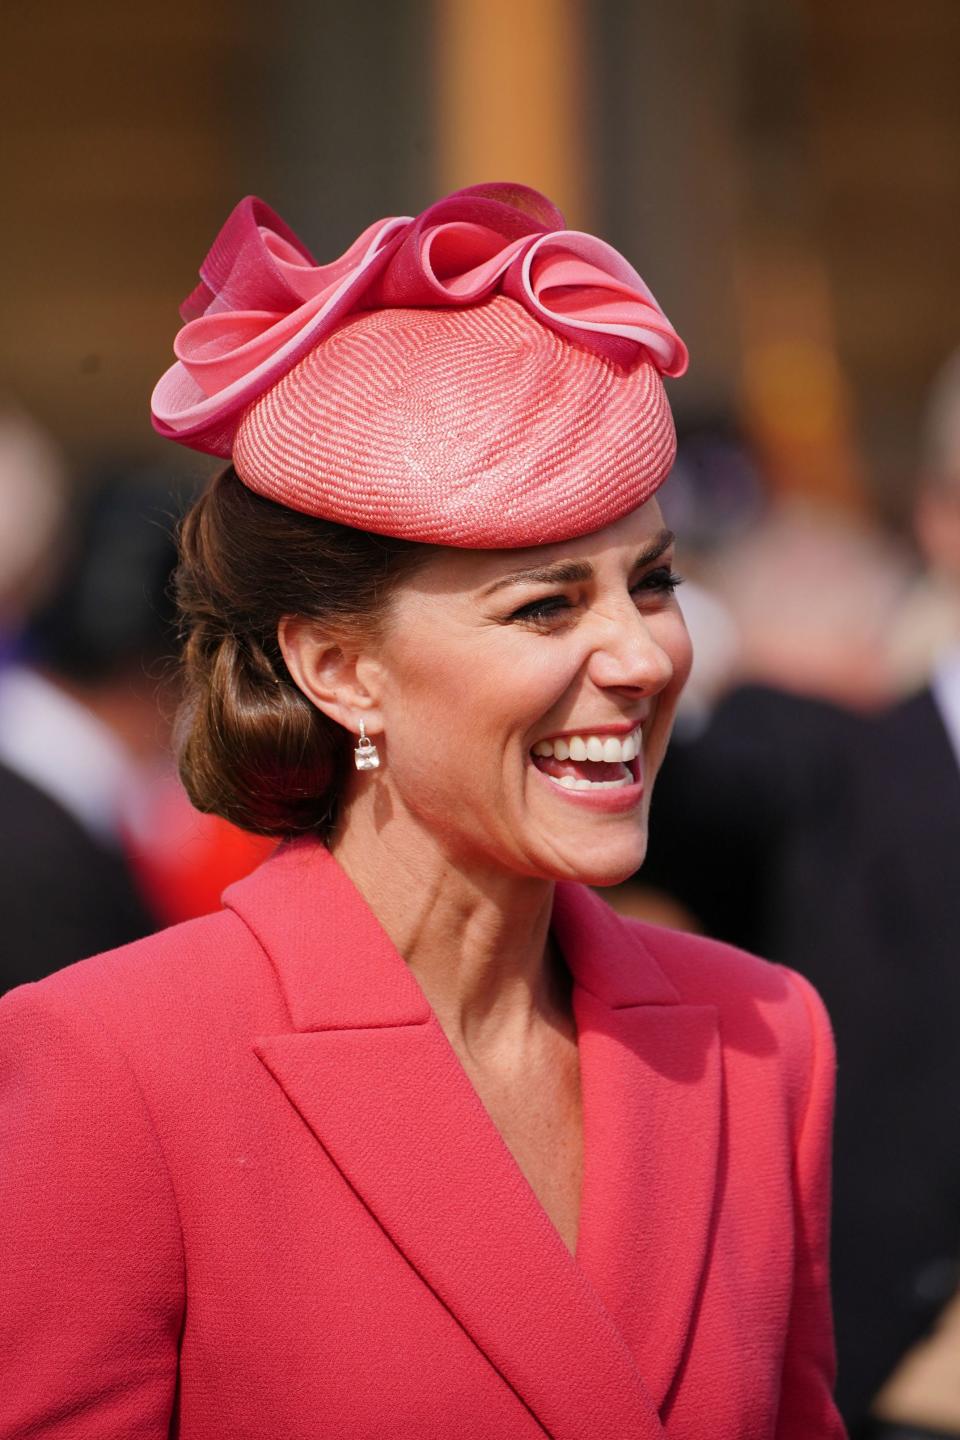 The Duchess of Cambridge smiles as she speaks to guests at a Royal Garden Party 